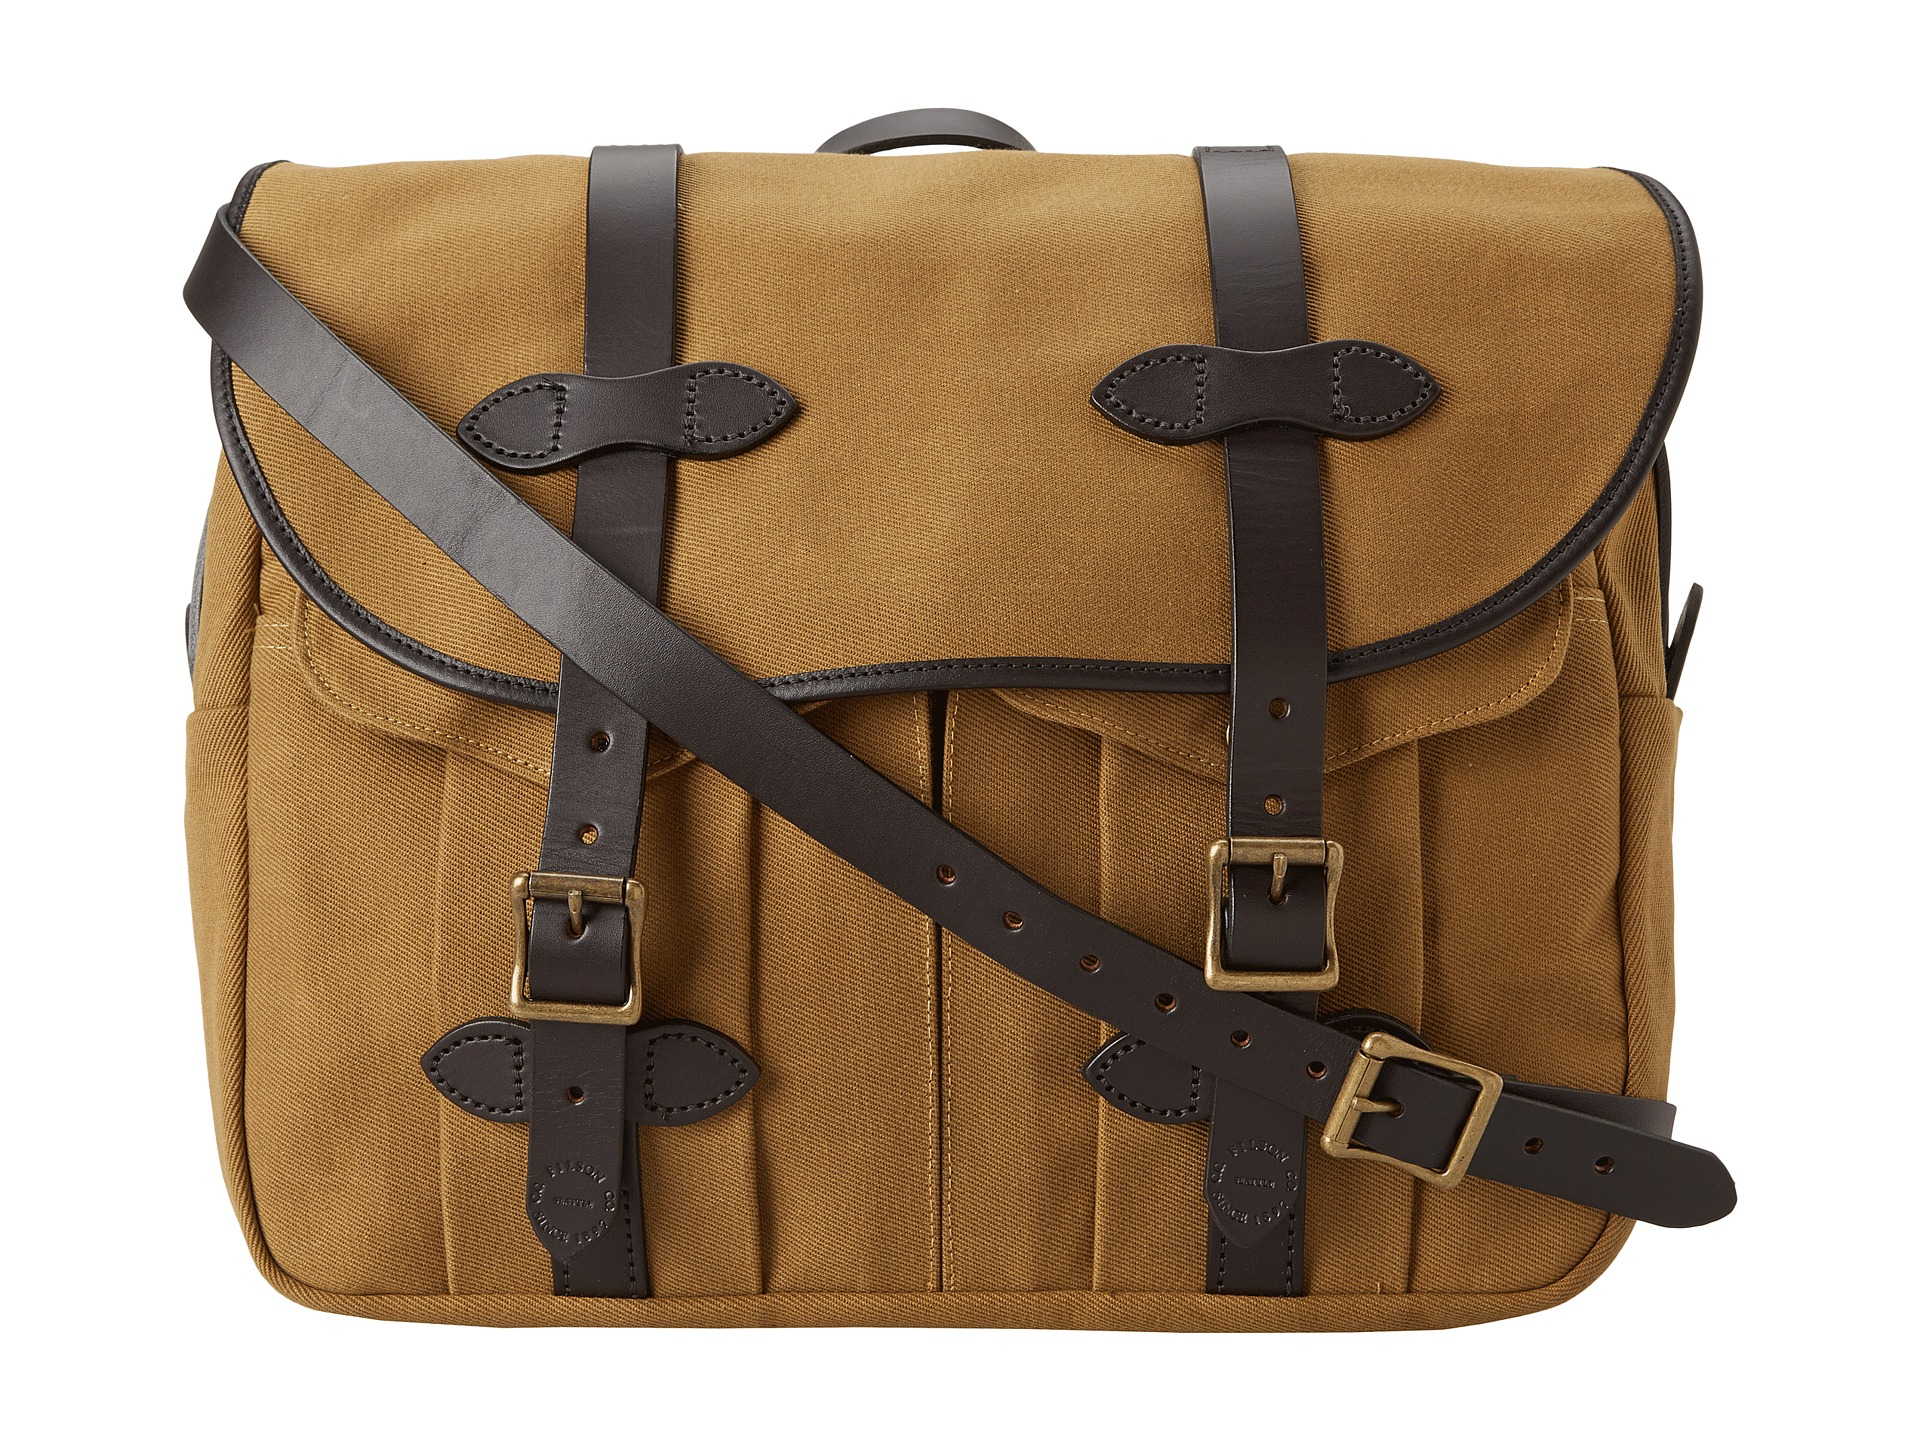 Filson Leather Small Carry-on Bag in Tan (Brown) for Men - Lyst